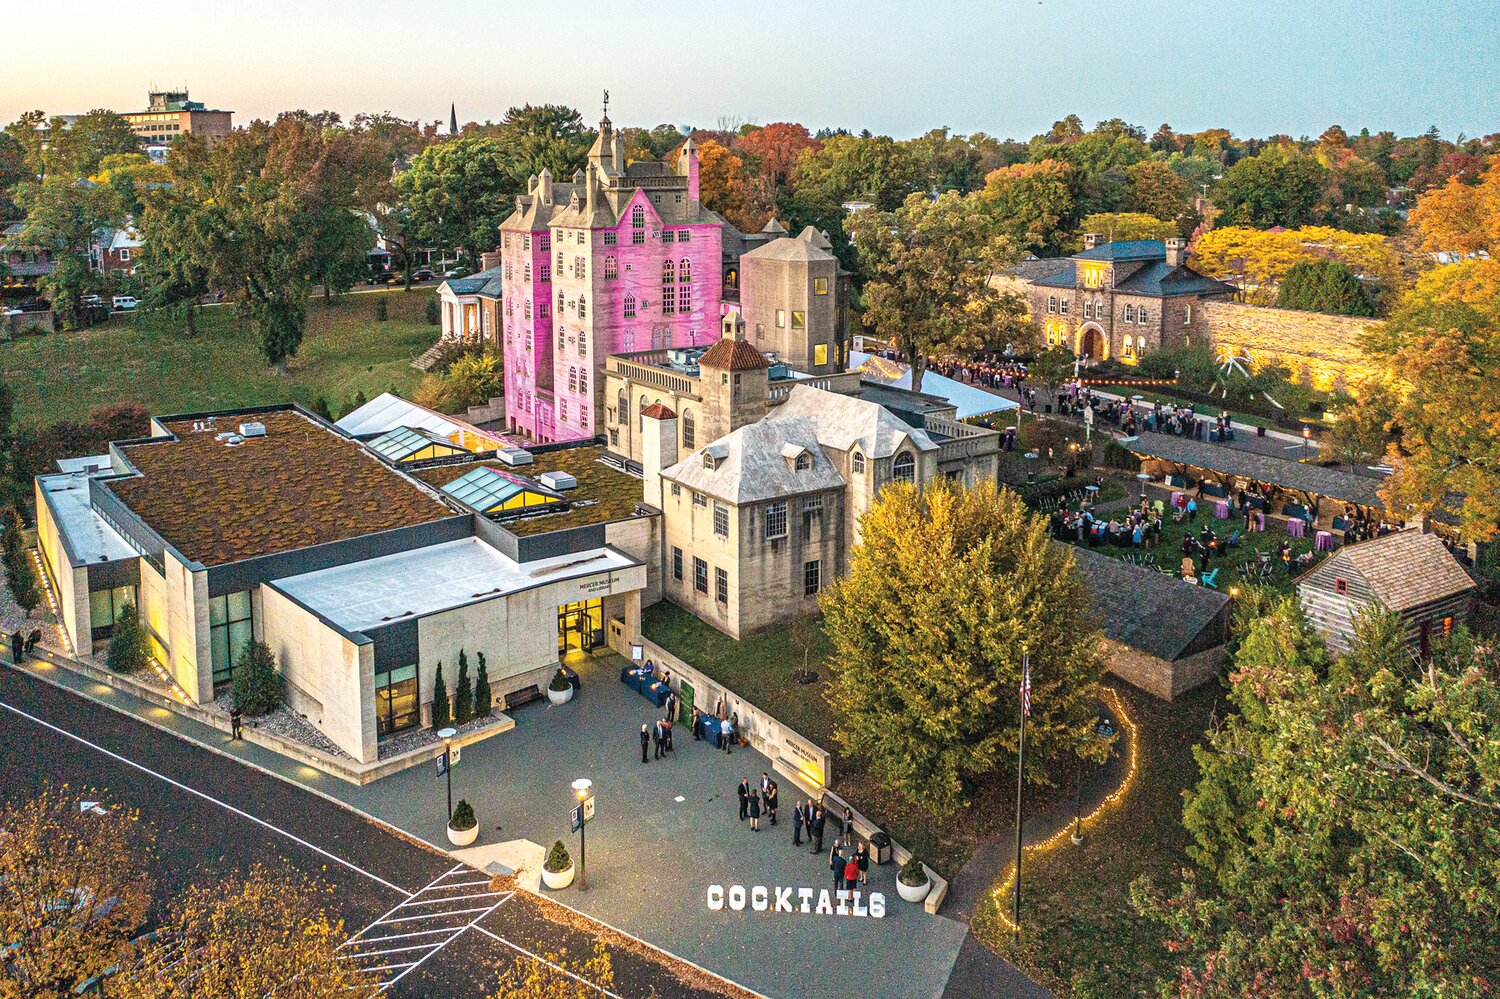 Cocktails at the Castle will take place this year on Oct. 14.